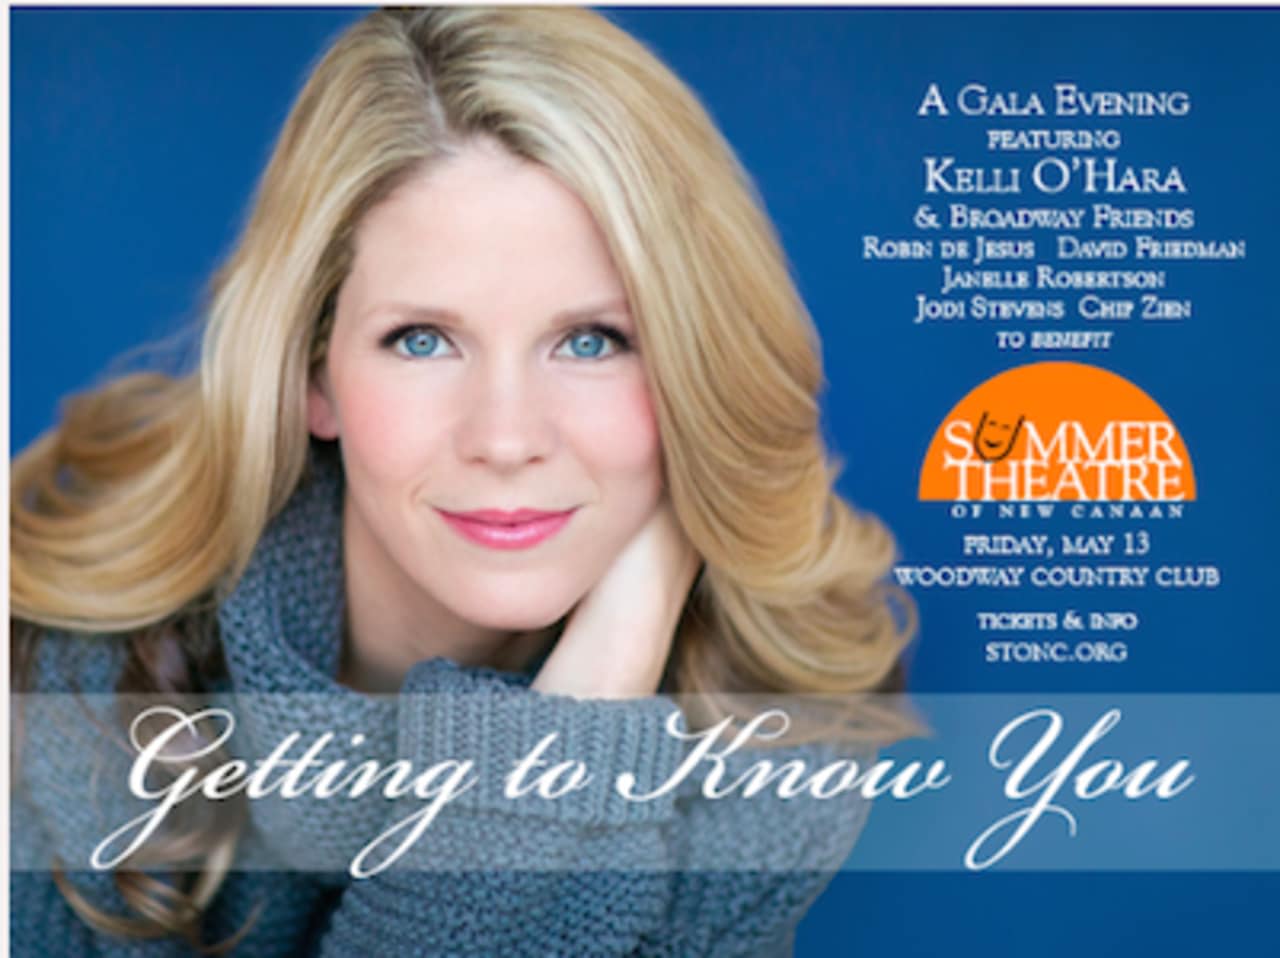 Tony Award-winning Broadway actress Kelli O'Hara. A gala benefit party, dinner and concert featuring O'Hara will take place May 13 at the Woodway Country Club in Darien.